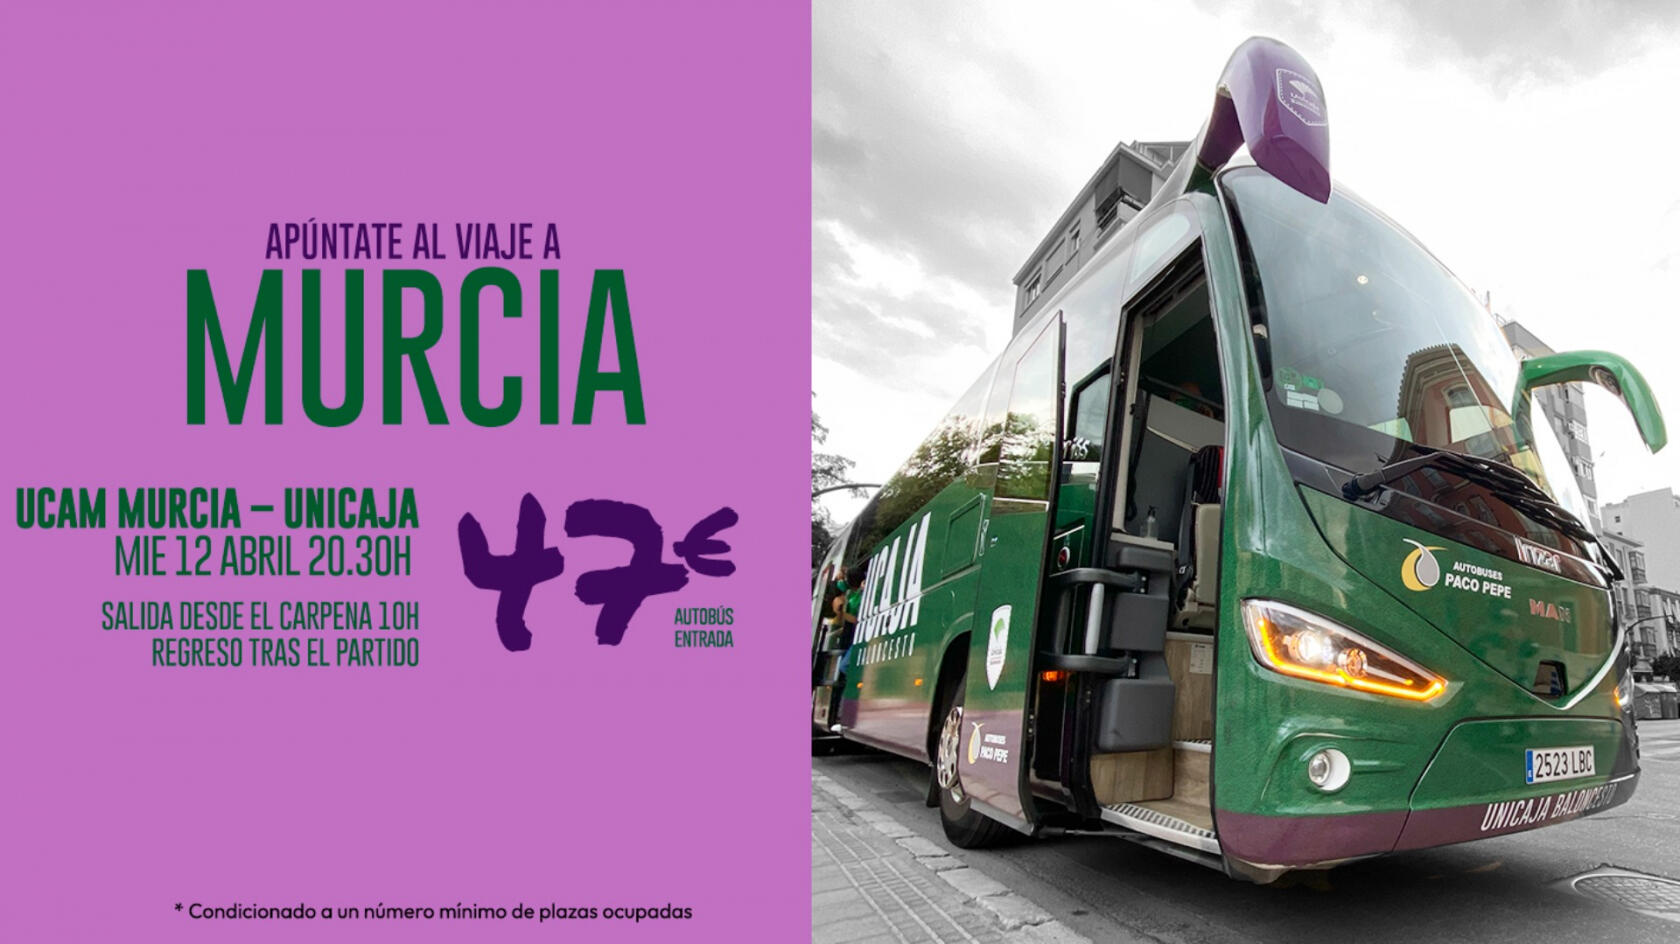 Come to Murcia to support Unicaja!